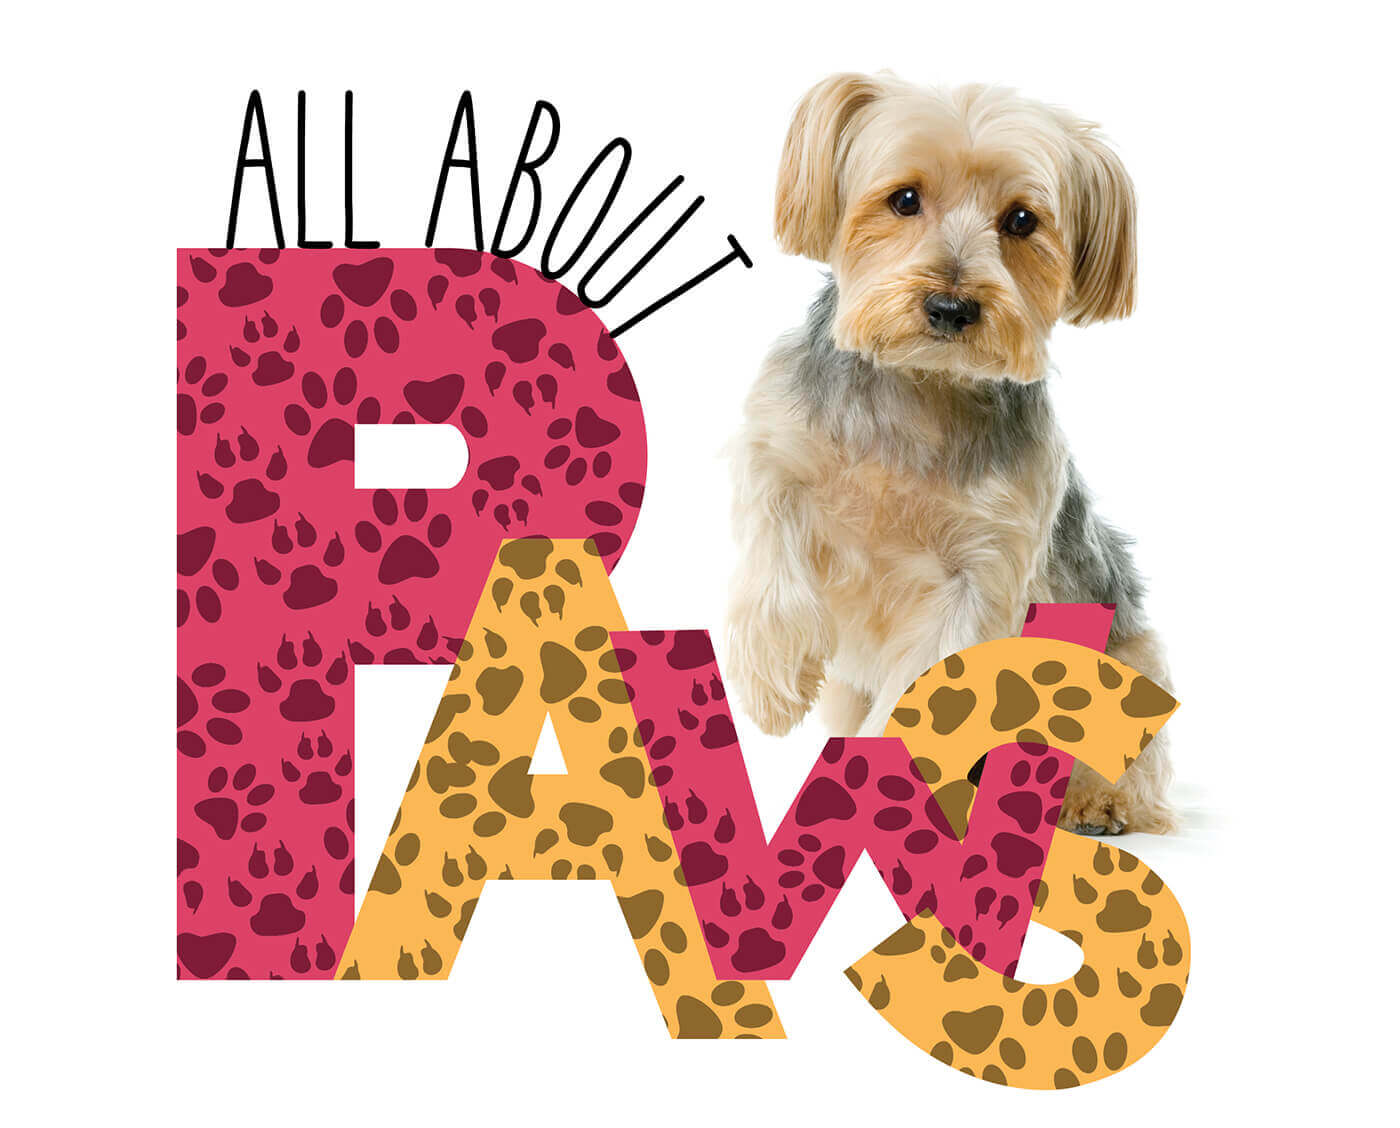 All About Paws - Groomer to Groomer